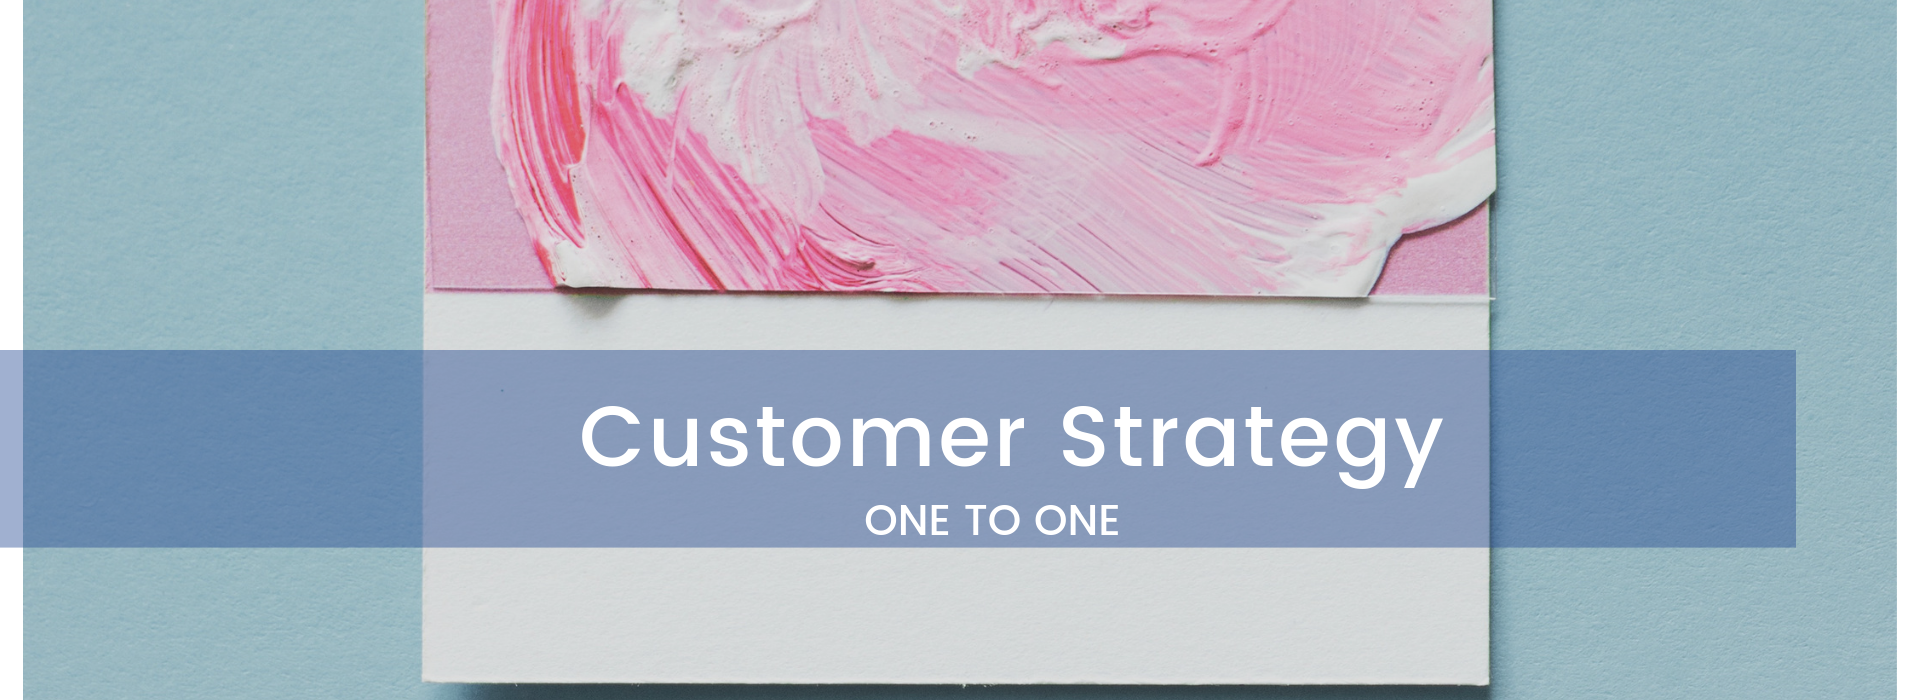 customer strategy one to one